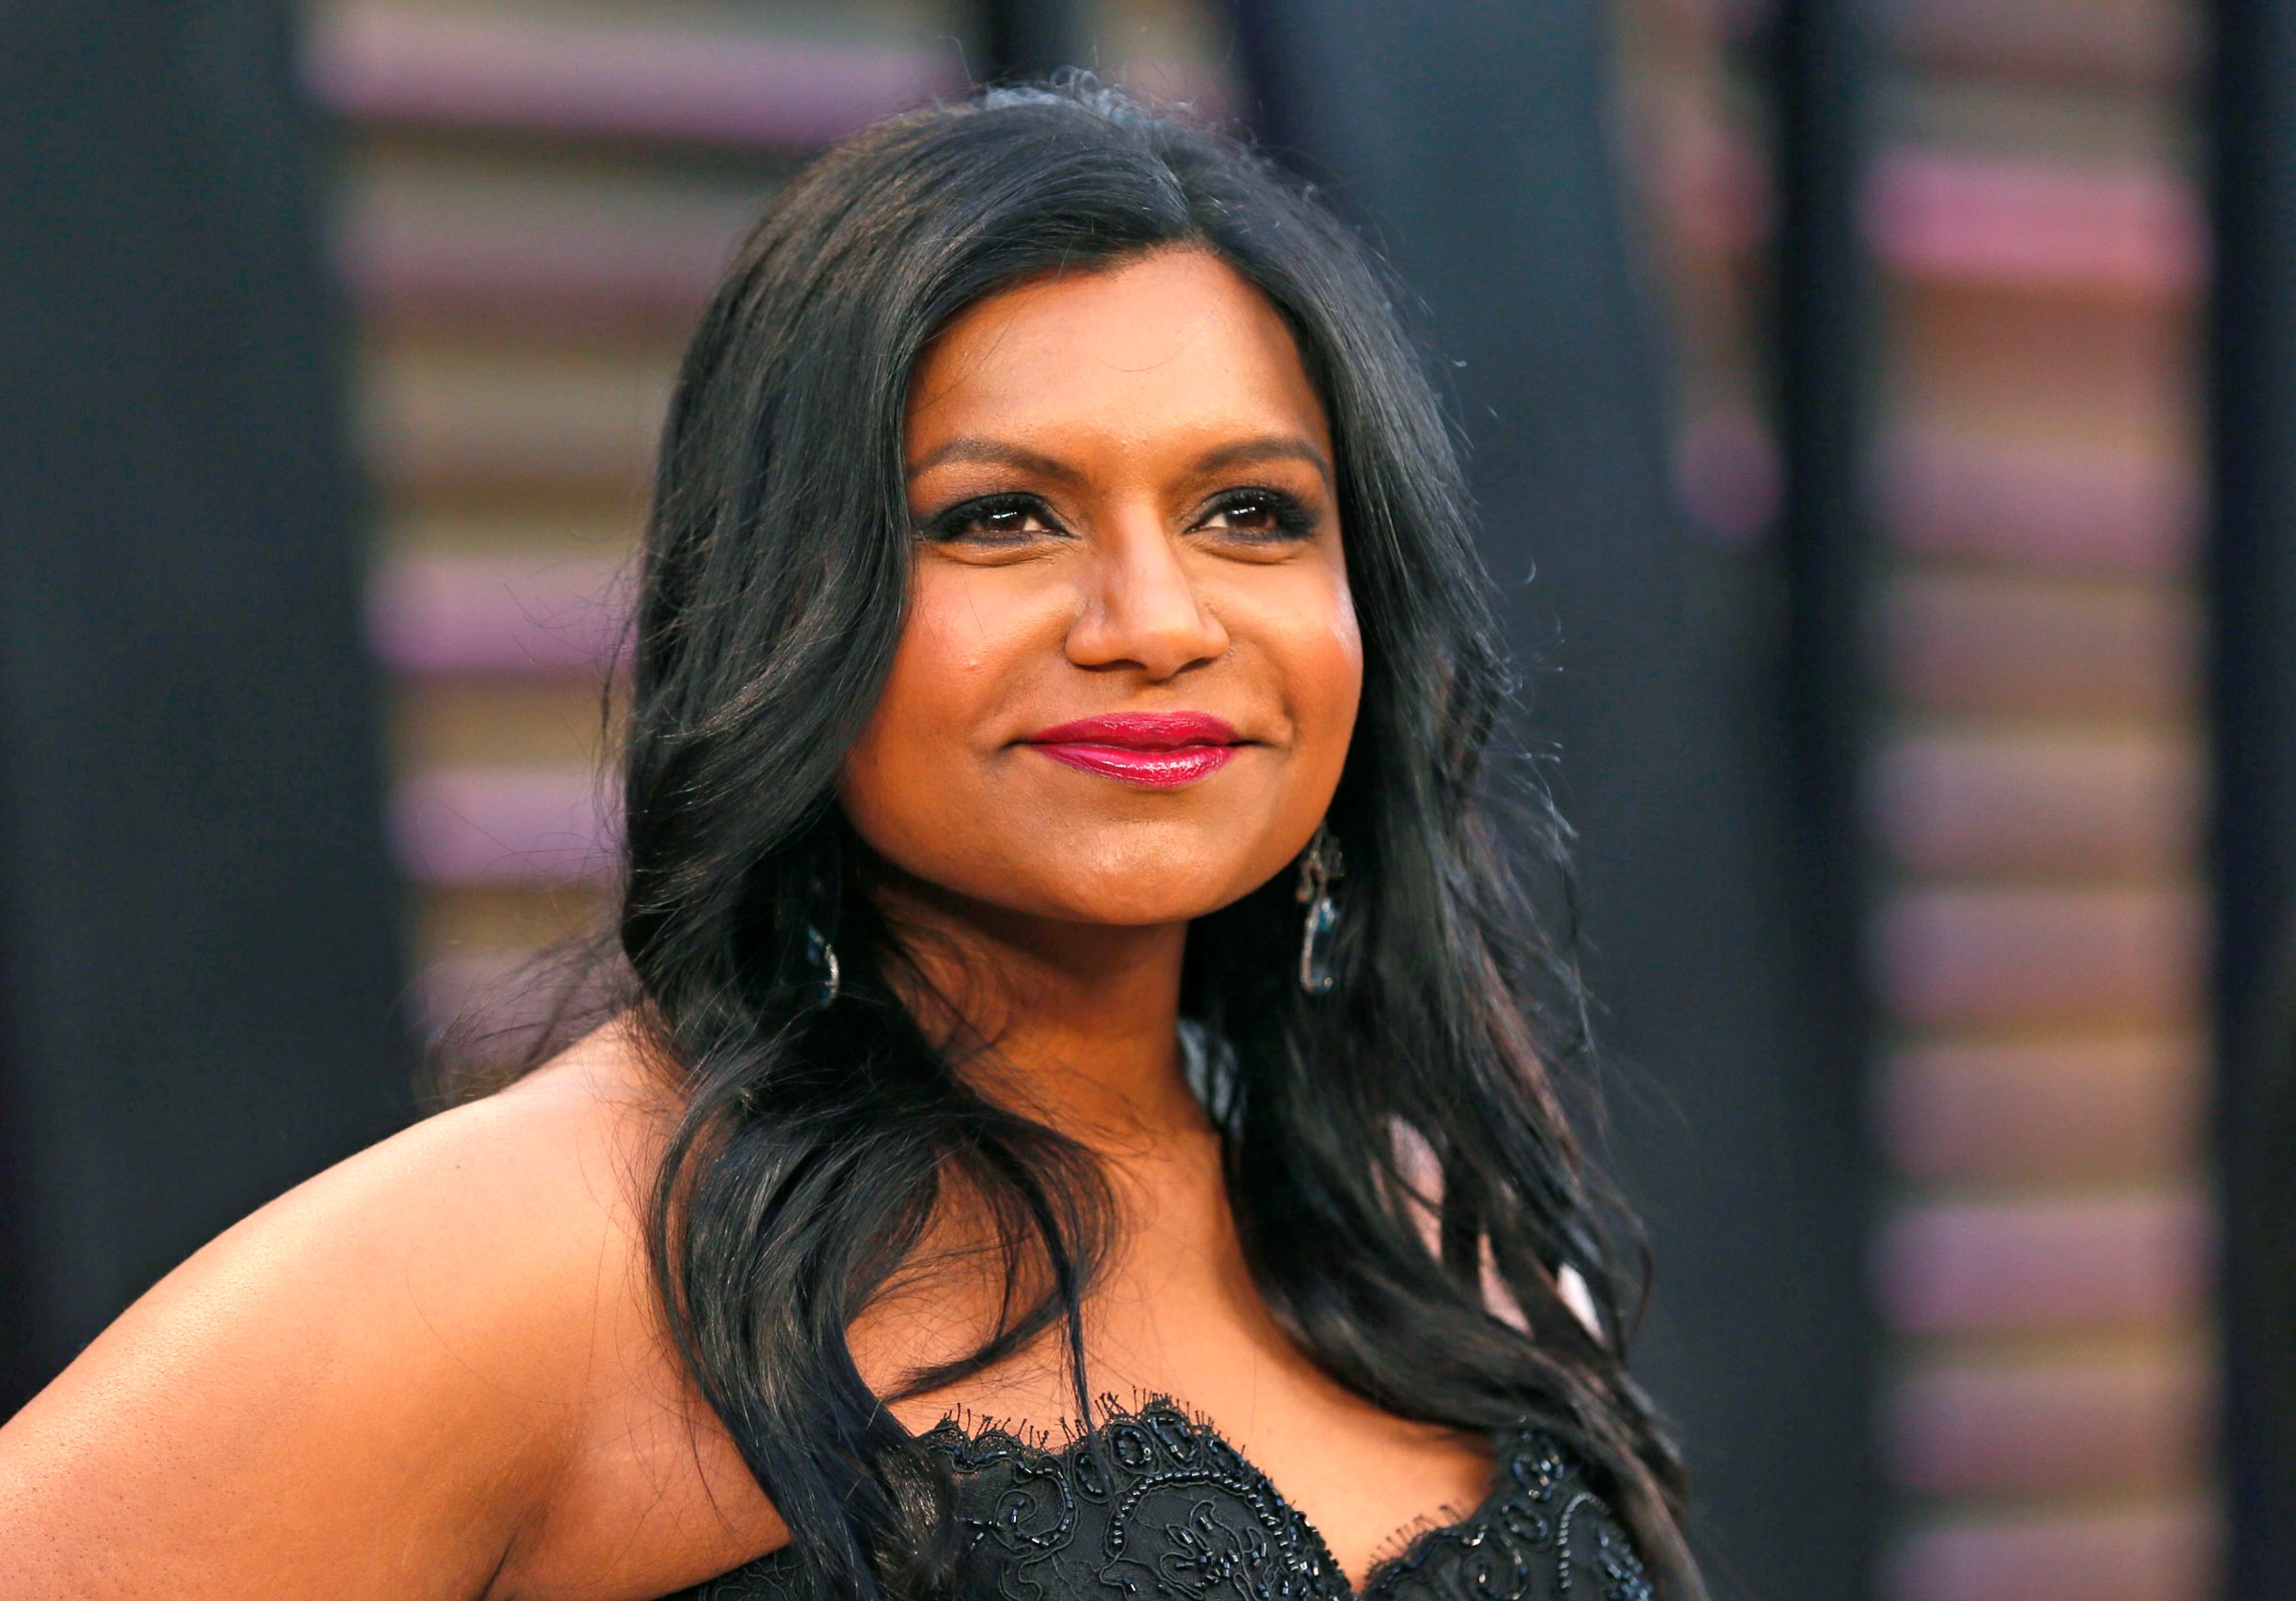 Mindy Kaling arrives at the 2014 Vanity Fair Oscars Party in West Hollywood, Calif., on March 2, 2014.